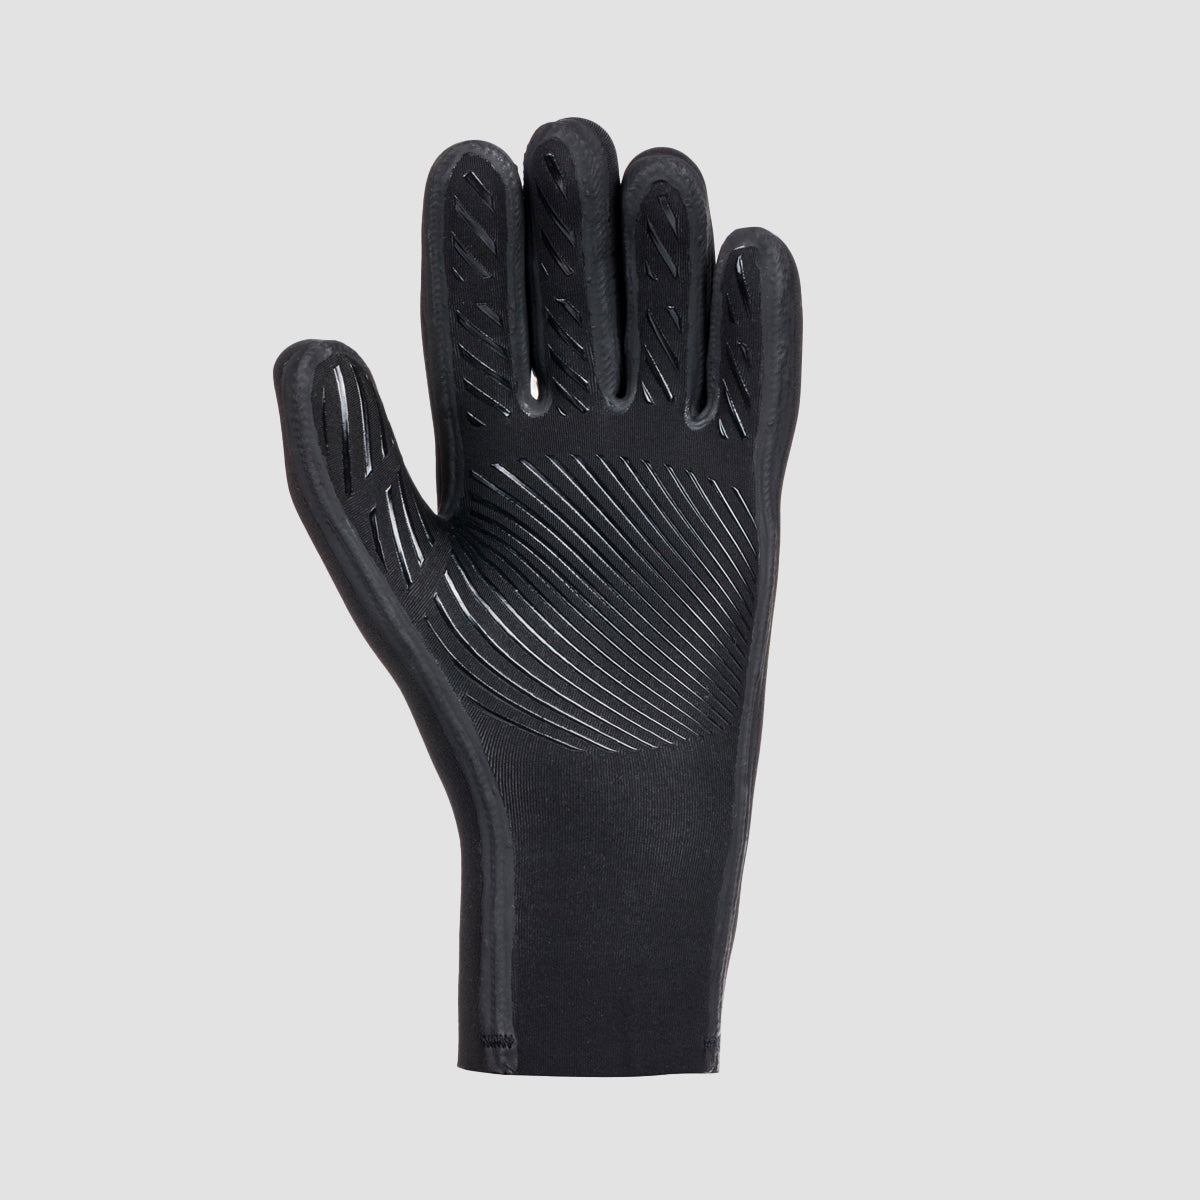 Roxy 3mm Swell Series 2022 Wetsuit Gloves Black - Womens